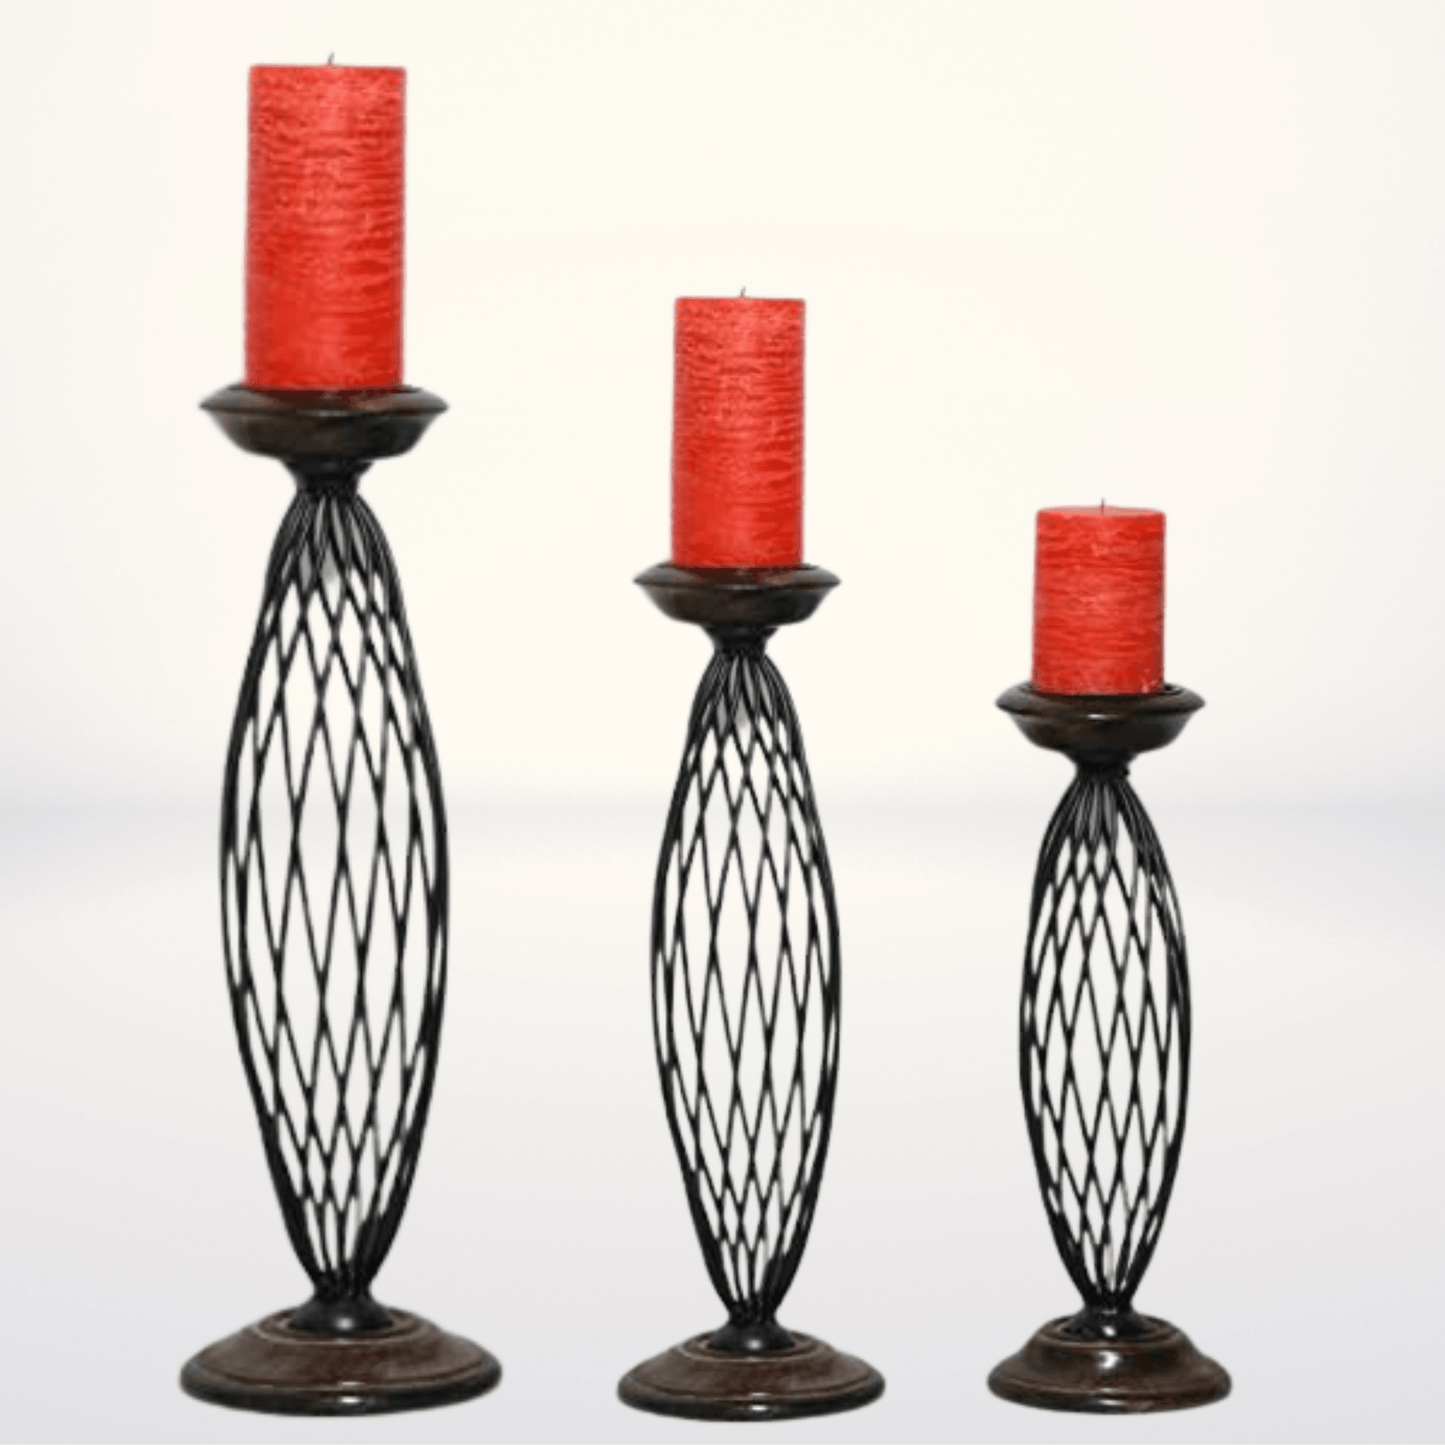 3 Pcs Floor Standing Metal Candle Holder - Twisted Style - Black - Stylla London